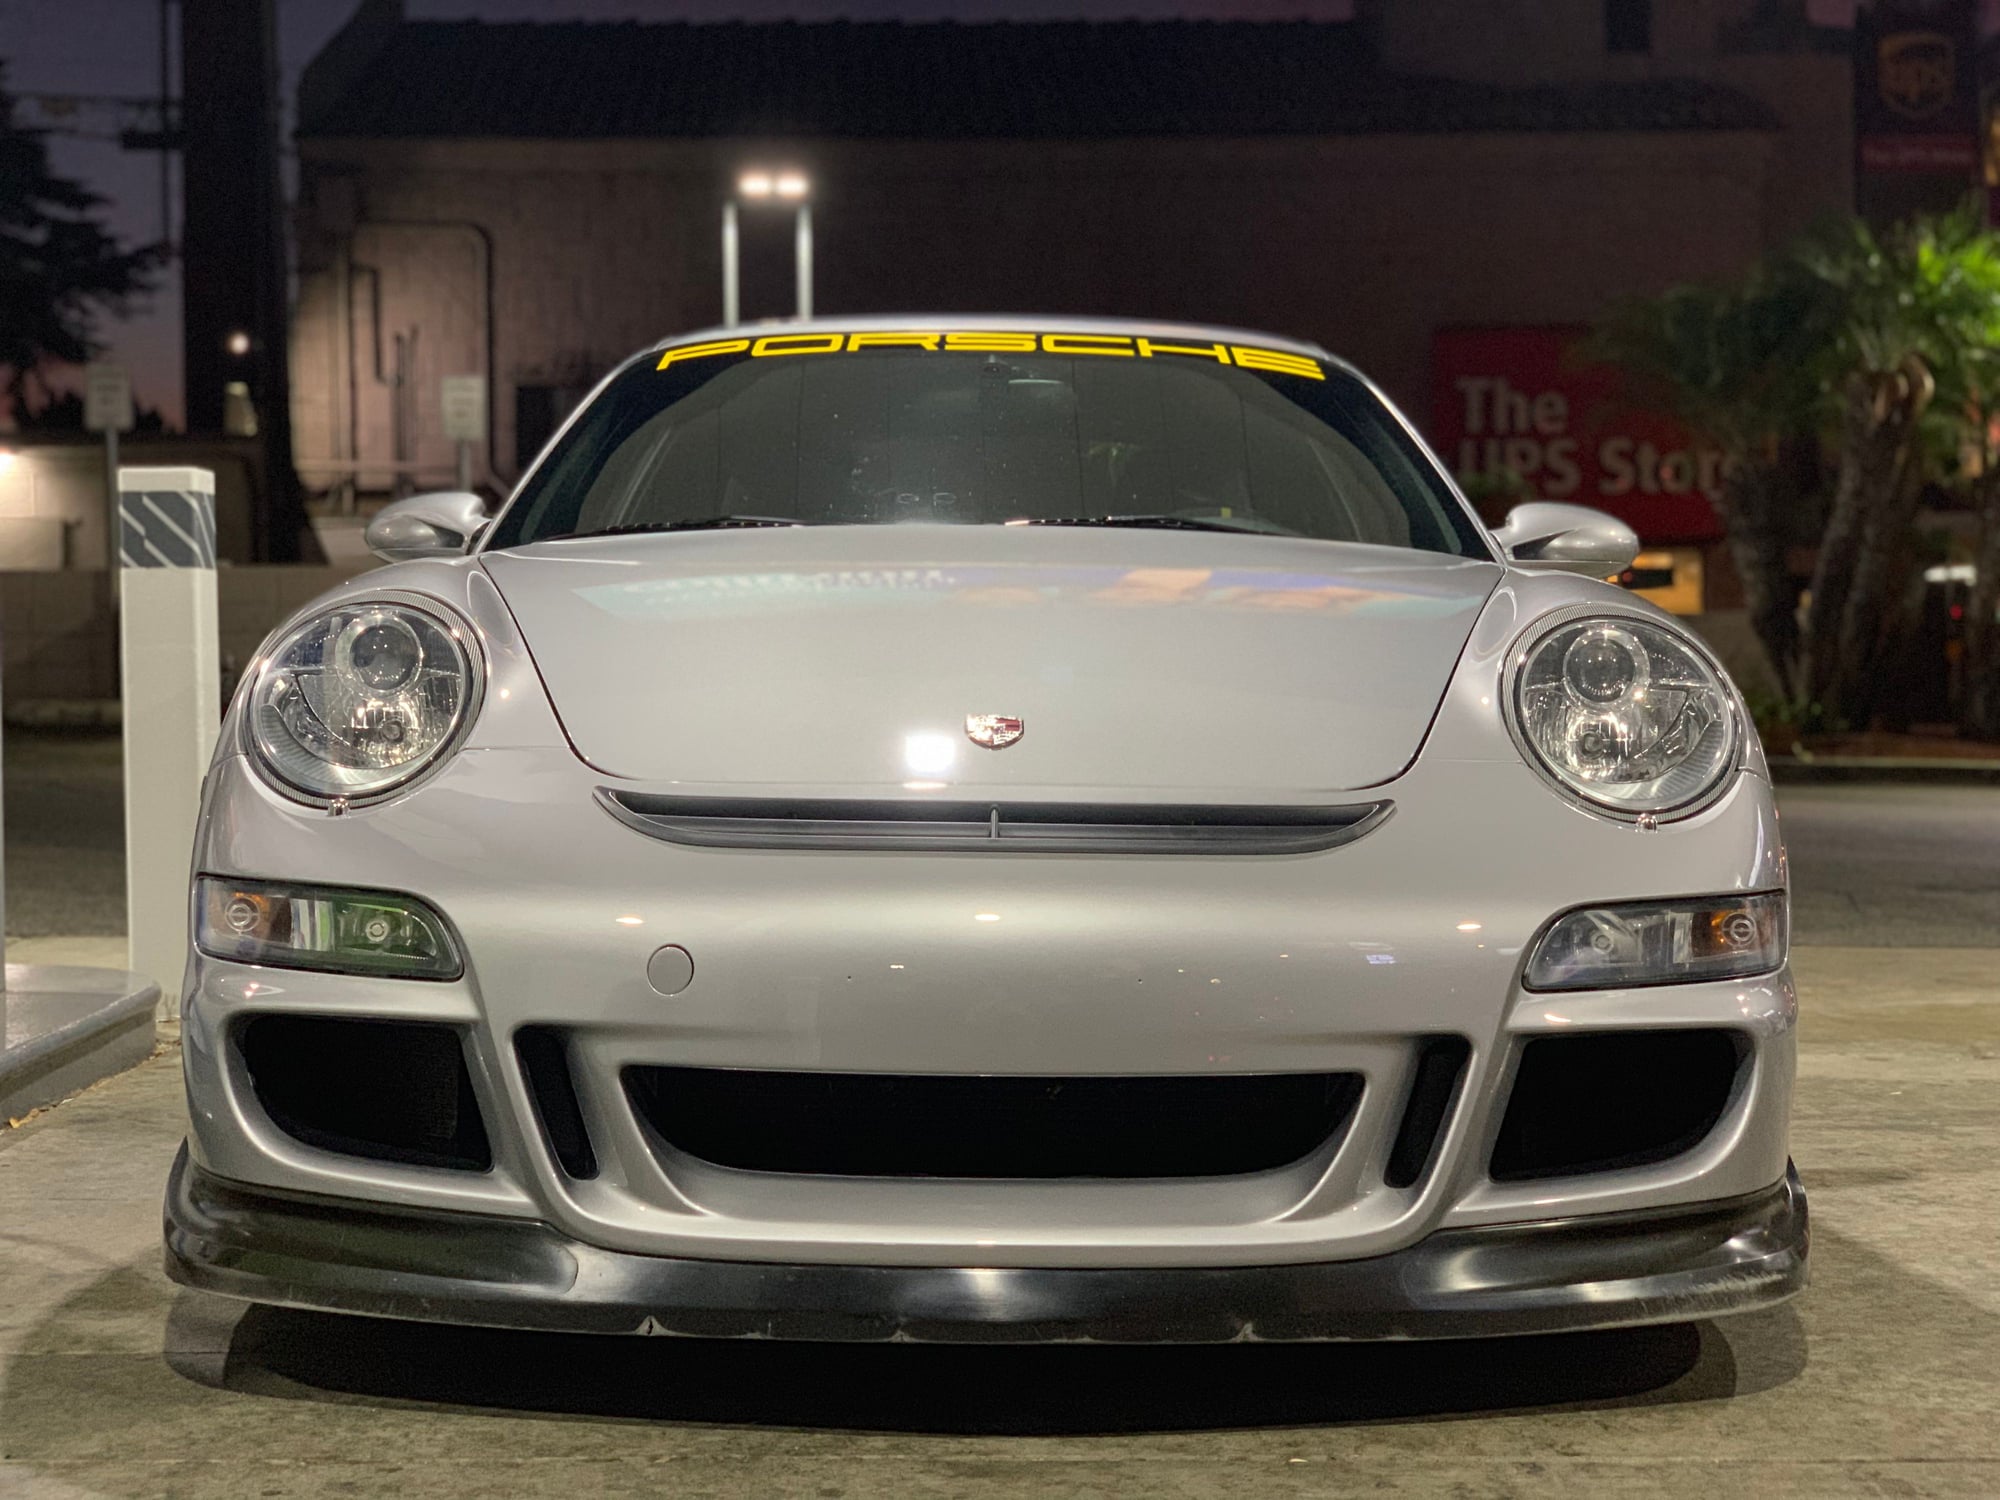 2007 Porsche GT3 - 07 GT3 - GT Silver - Used - VIN Wp0ac29927s792417 - 64,500 Miles - West Hollywood, CA 90046, United States